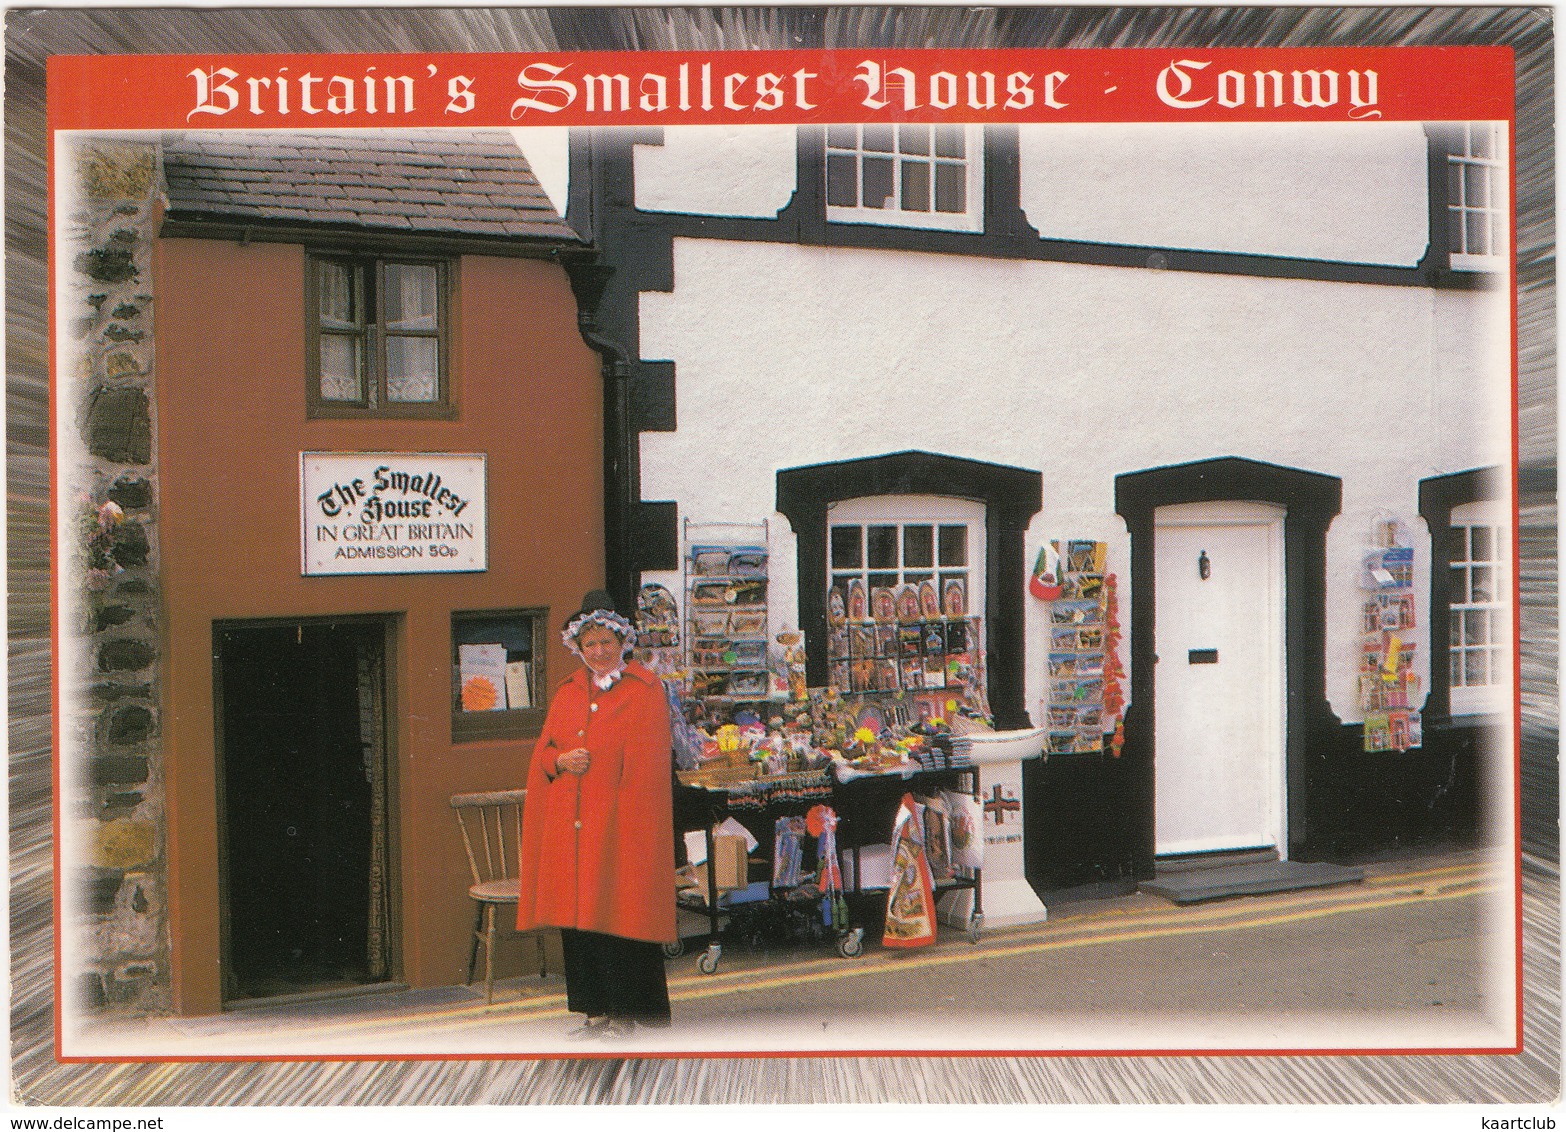 Britain's Smallest House - Conwy -  (Wales) - John Hinde - Caernarvonshire